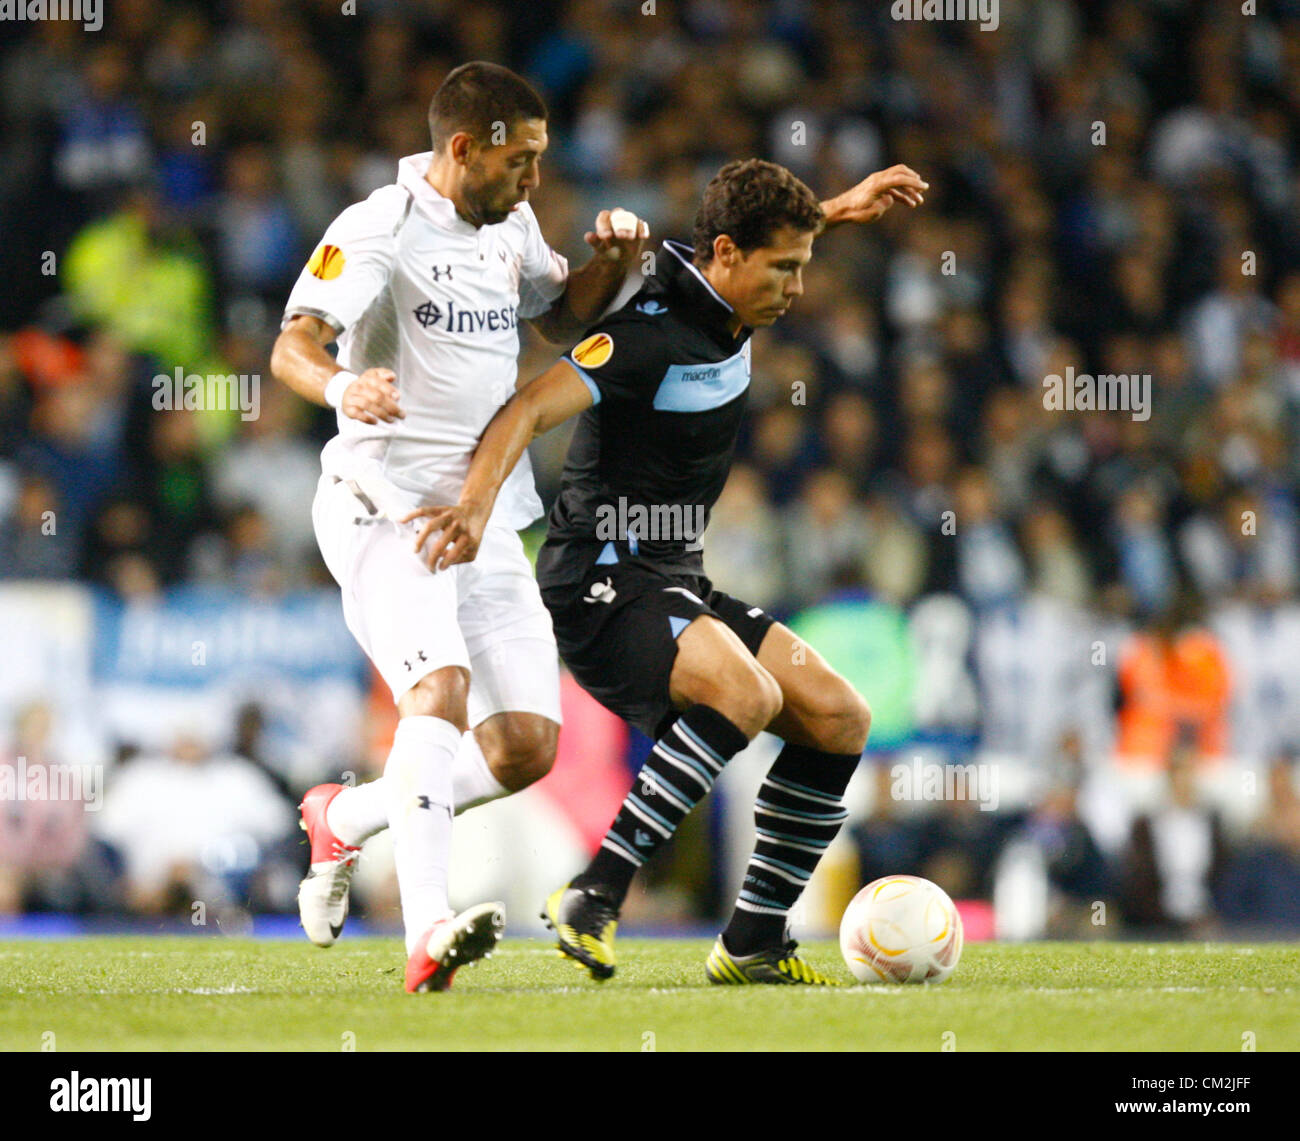 20.09.2012 London, ENGLAND:  Hernanes of S.S. Lazio and Clint Dempsey of Tottenham Hotspur in action during the Europa League Group J match between Tottenham Hotspur and SS Lazio at White Hart Lane Stadium Stock Photo